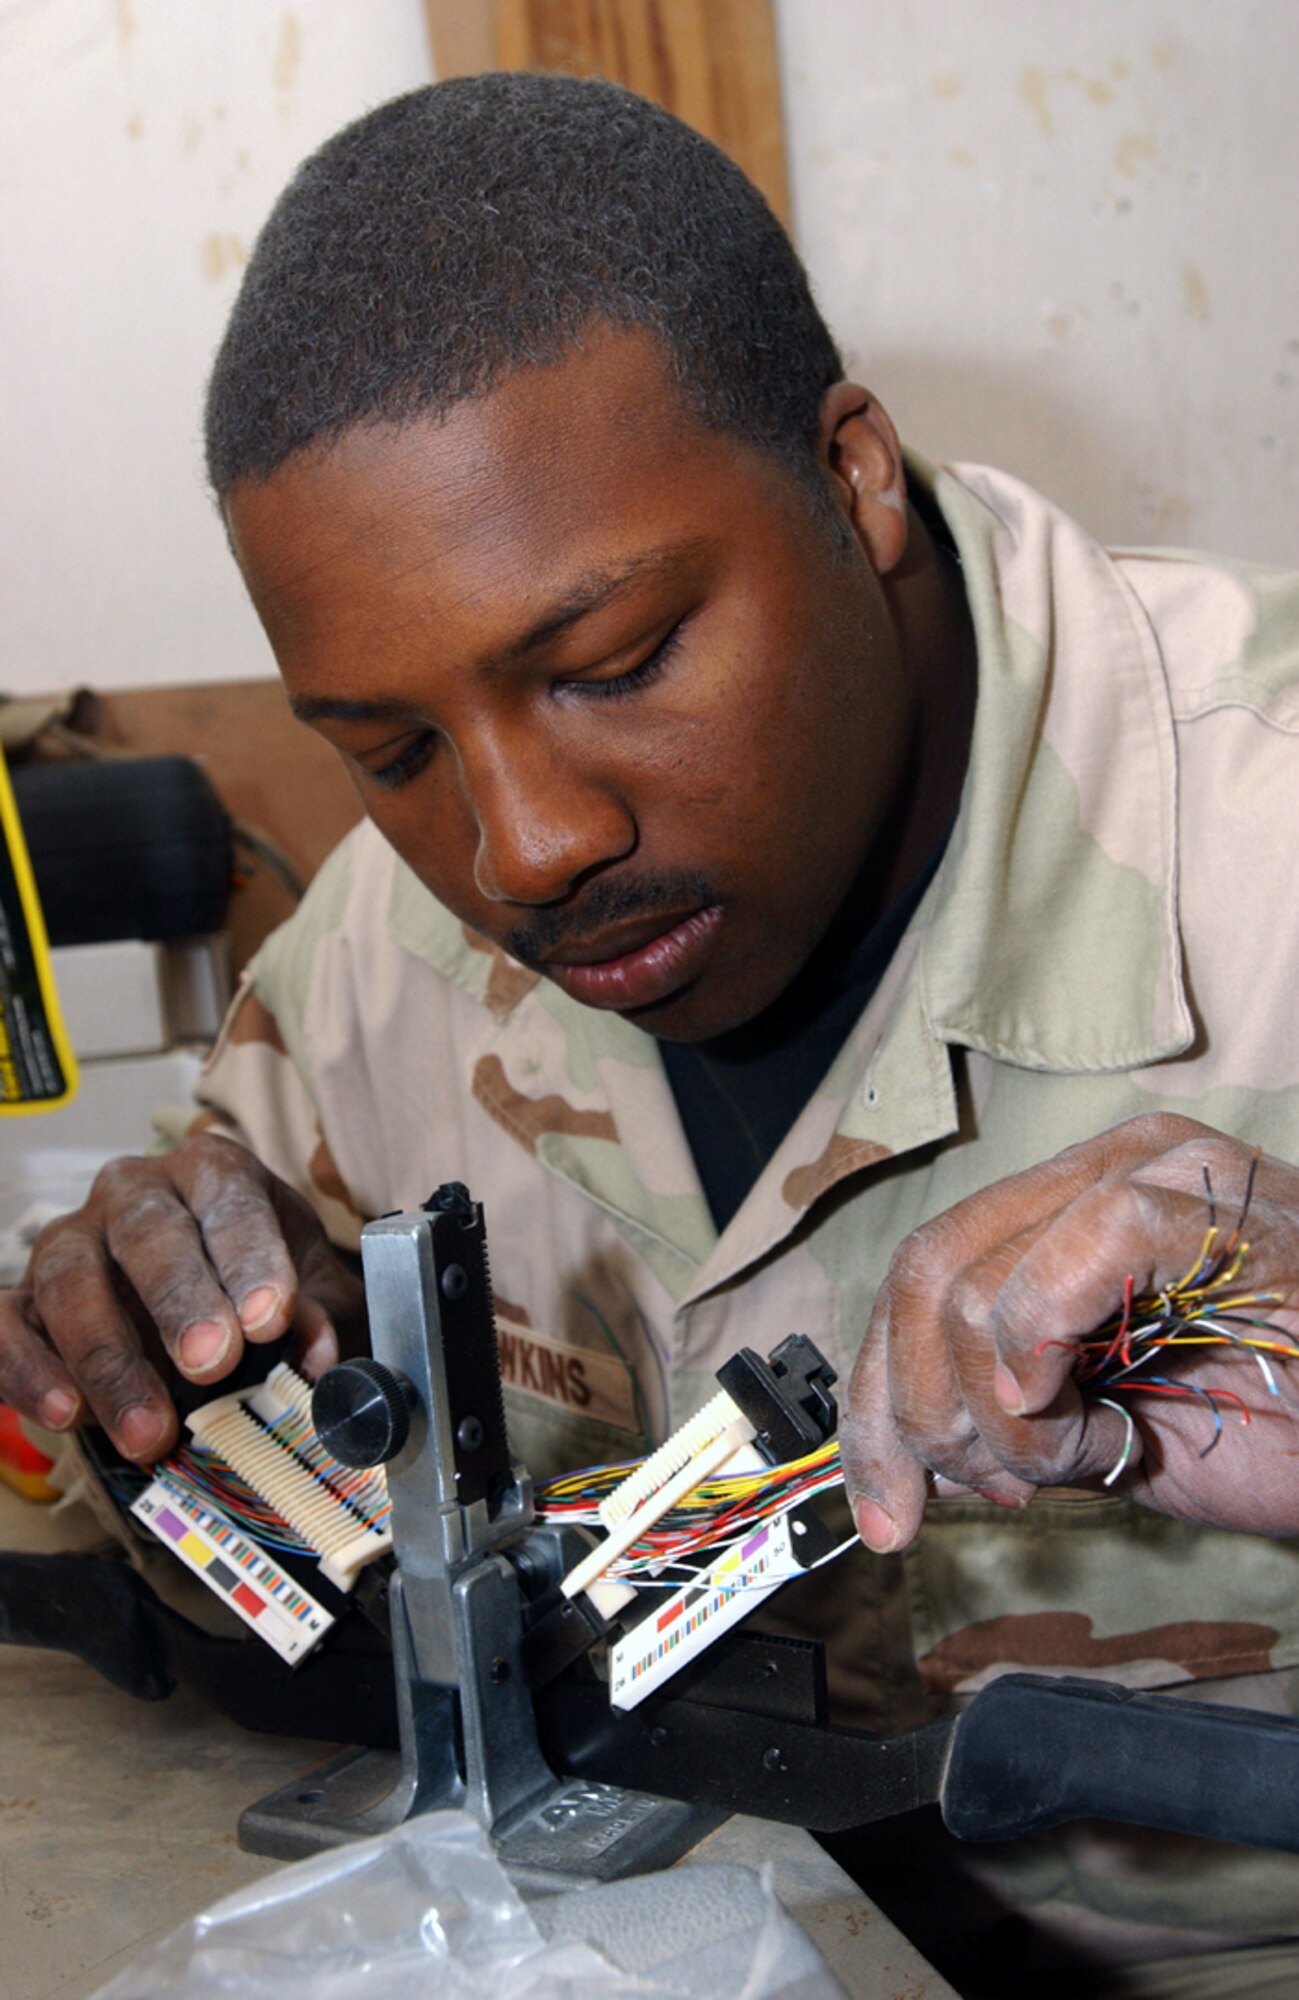 OPERATION IRAQI FREEDOM -- Staff Sgt. Kelvin Hawkins makes a connection on a communications cable at Tallil Air Base in southern Iraq.  Hawkins is a telephone systems technician with the 5th Combat Communications Group from Robins Air Force Base, Ga.  (U.S. Air Force photo by Master Sgt. Terry L. Blevins)